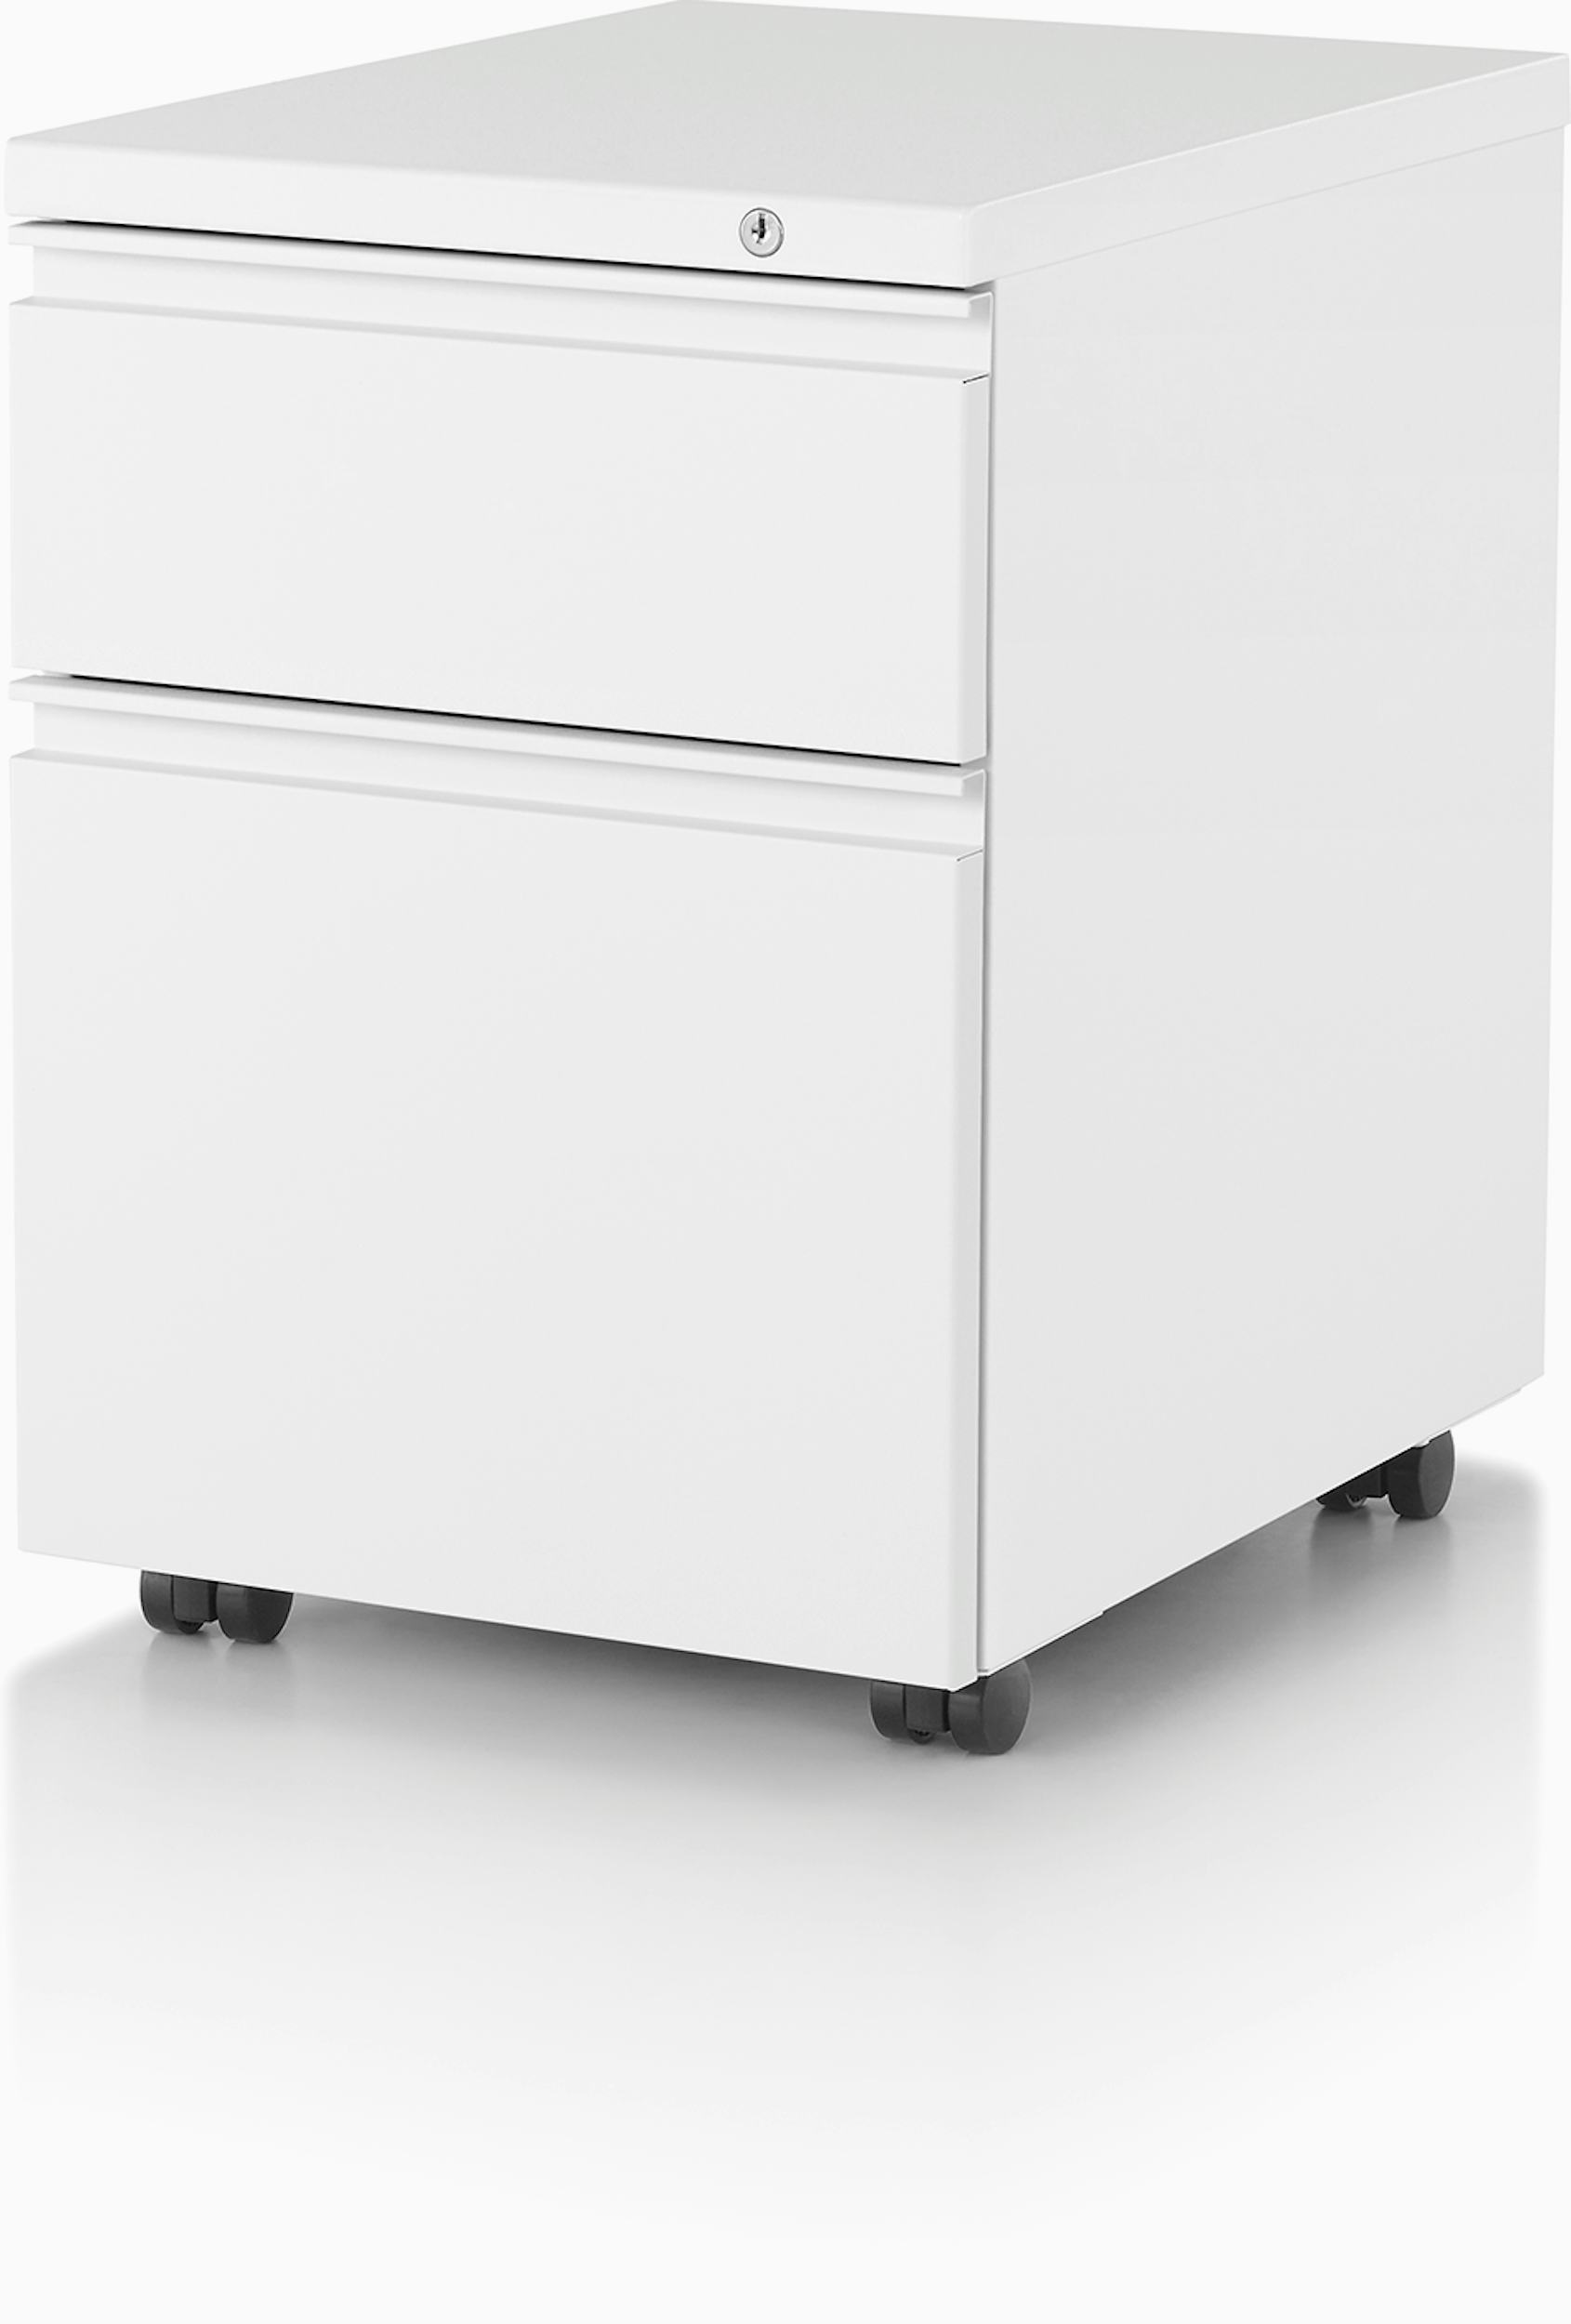 Project Case  Plastic File Cabinet: Streamlined Office Storage